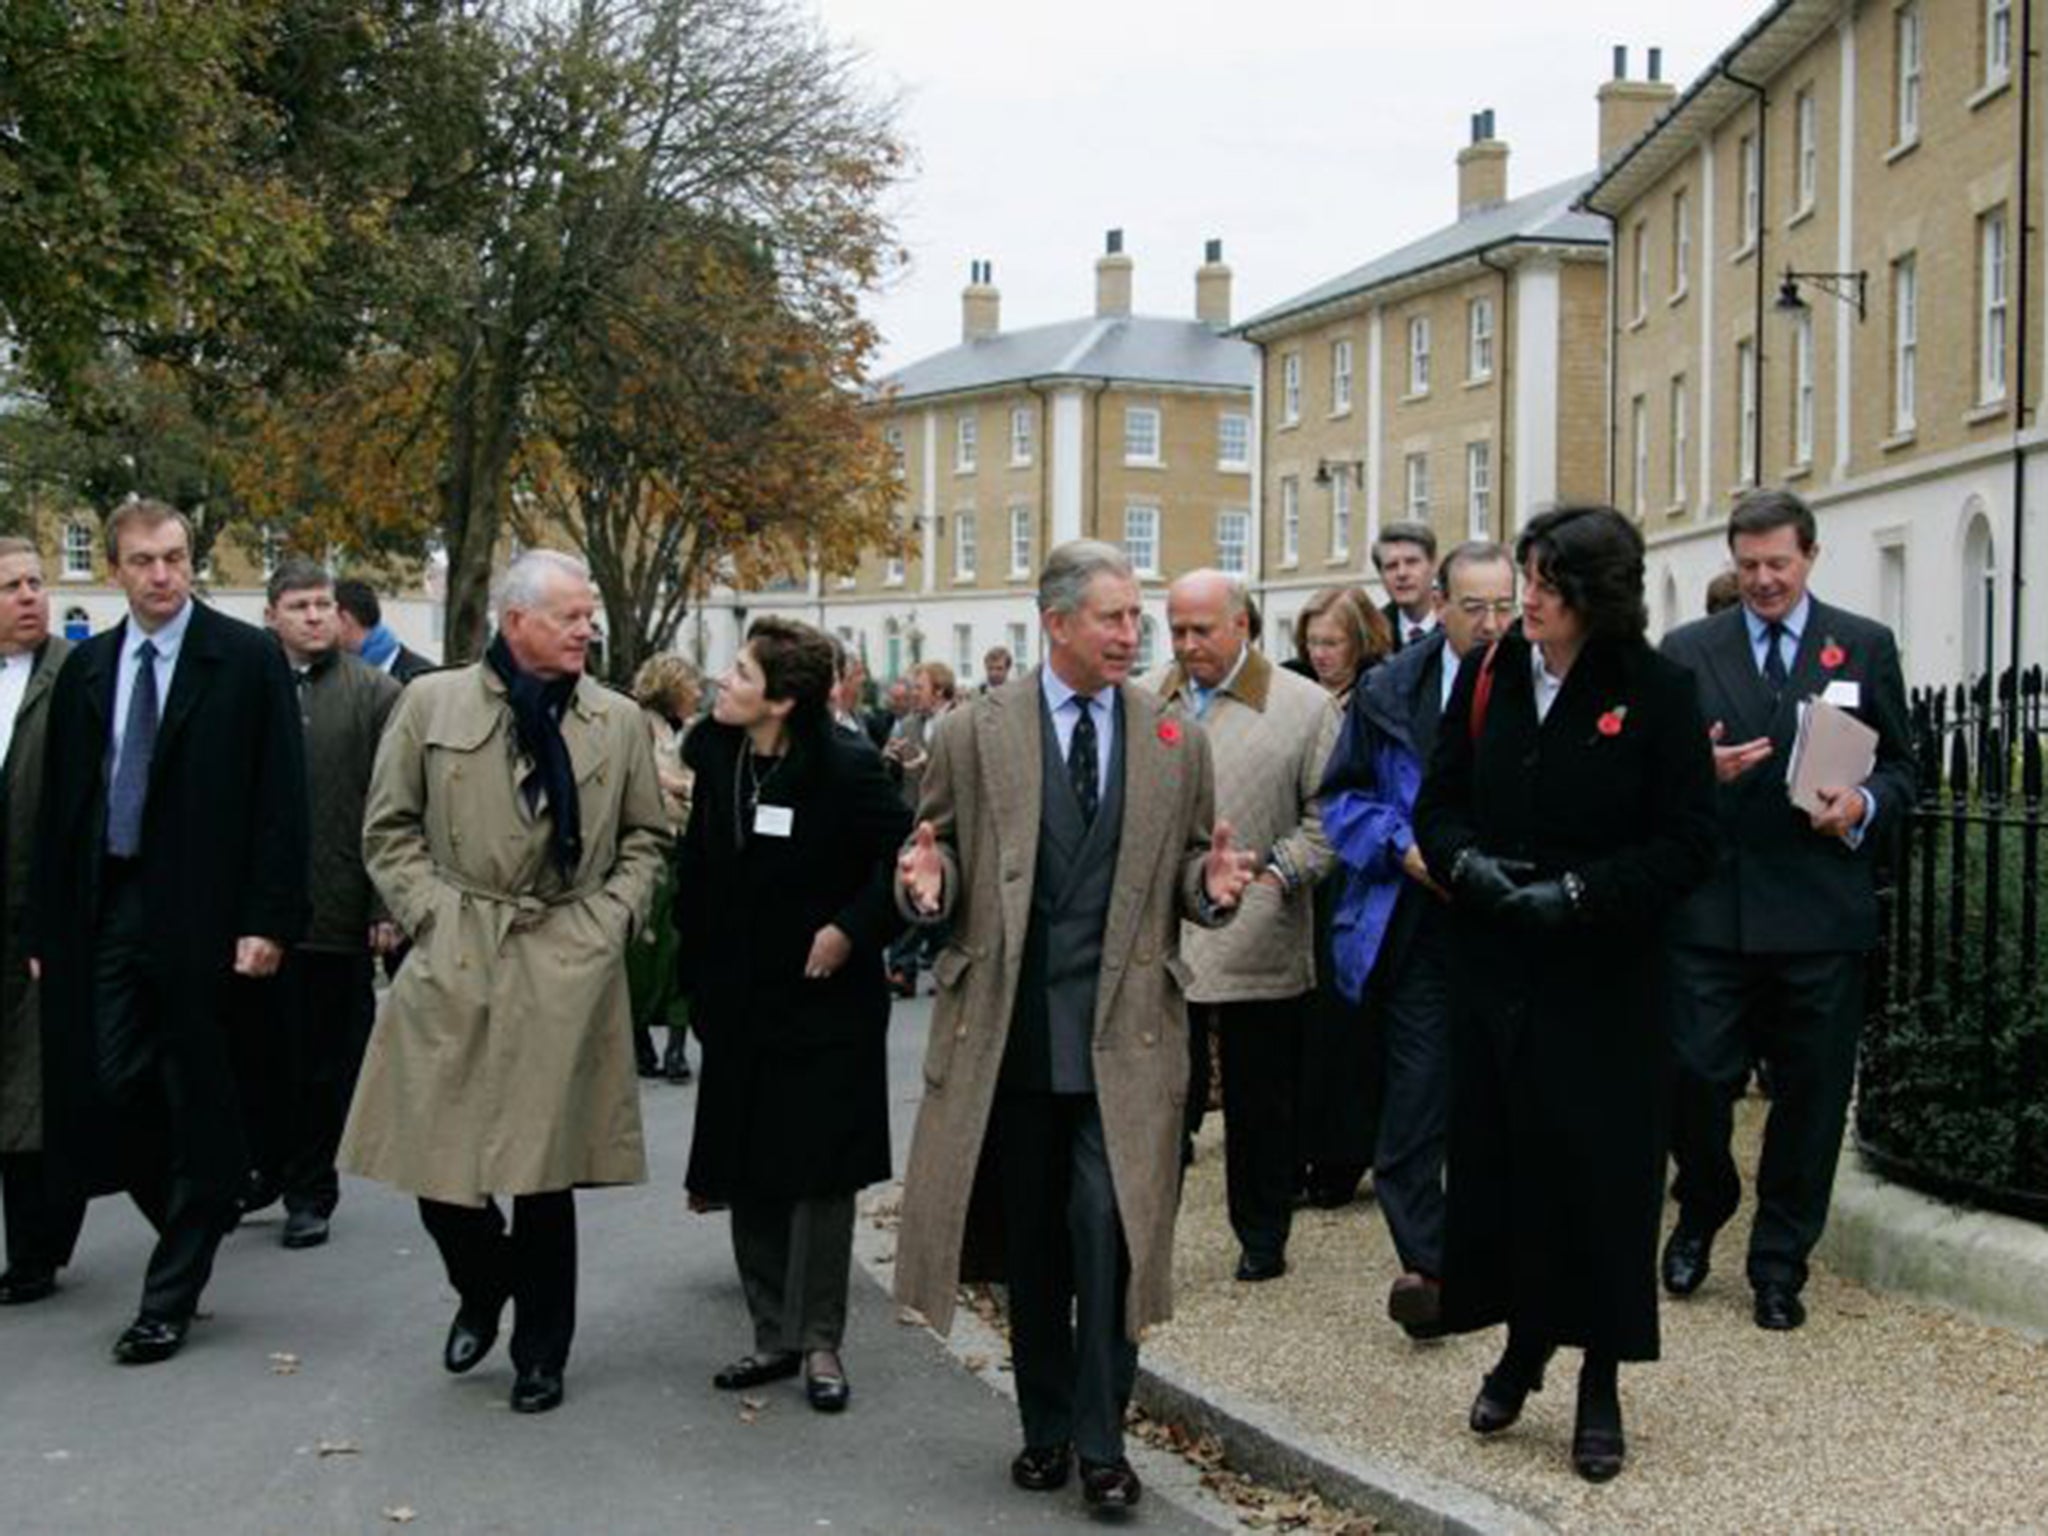 Prince Charles in Poundbury, his experimental new town in Dorset which has been dismissed as a ‘retro-kitsch fantasia’